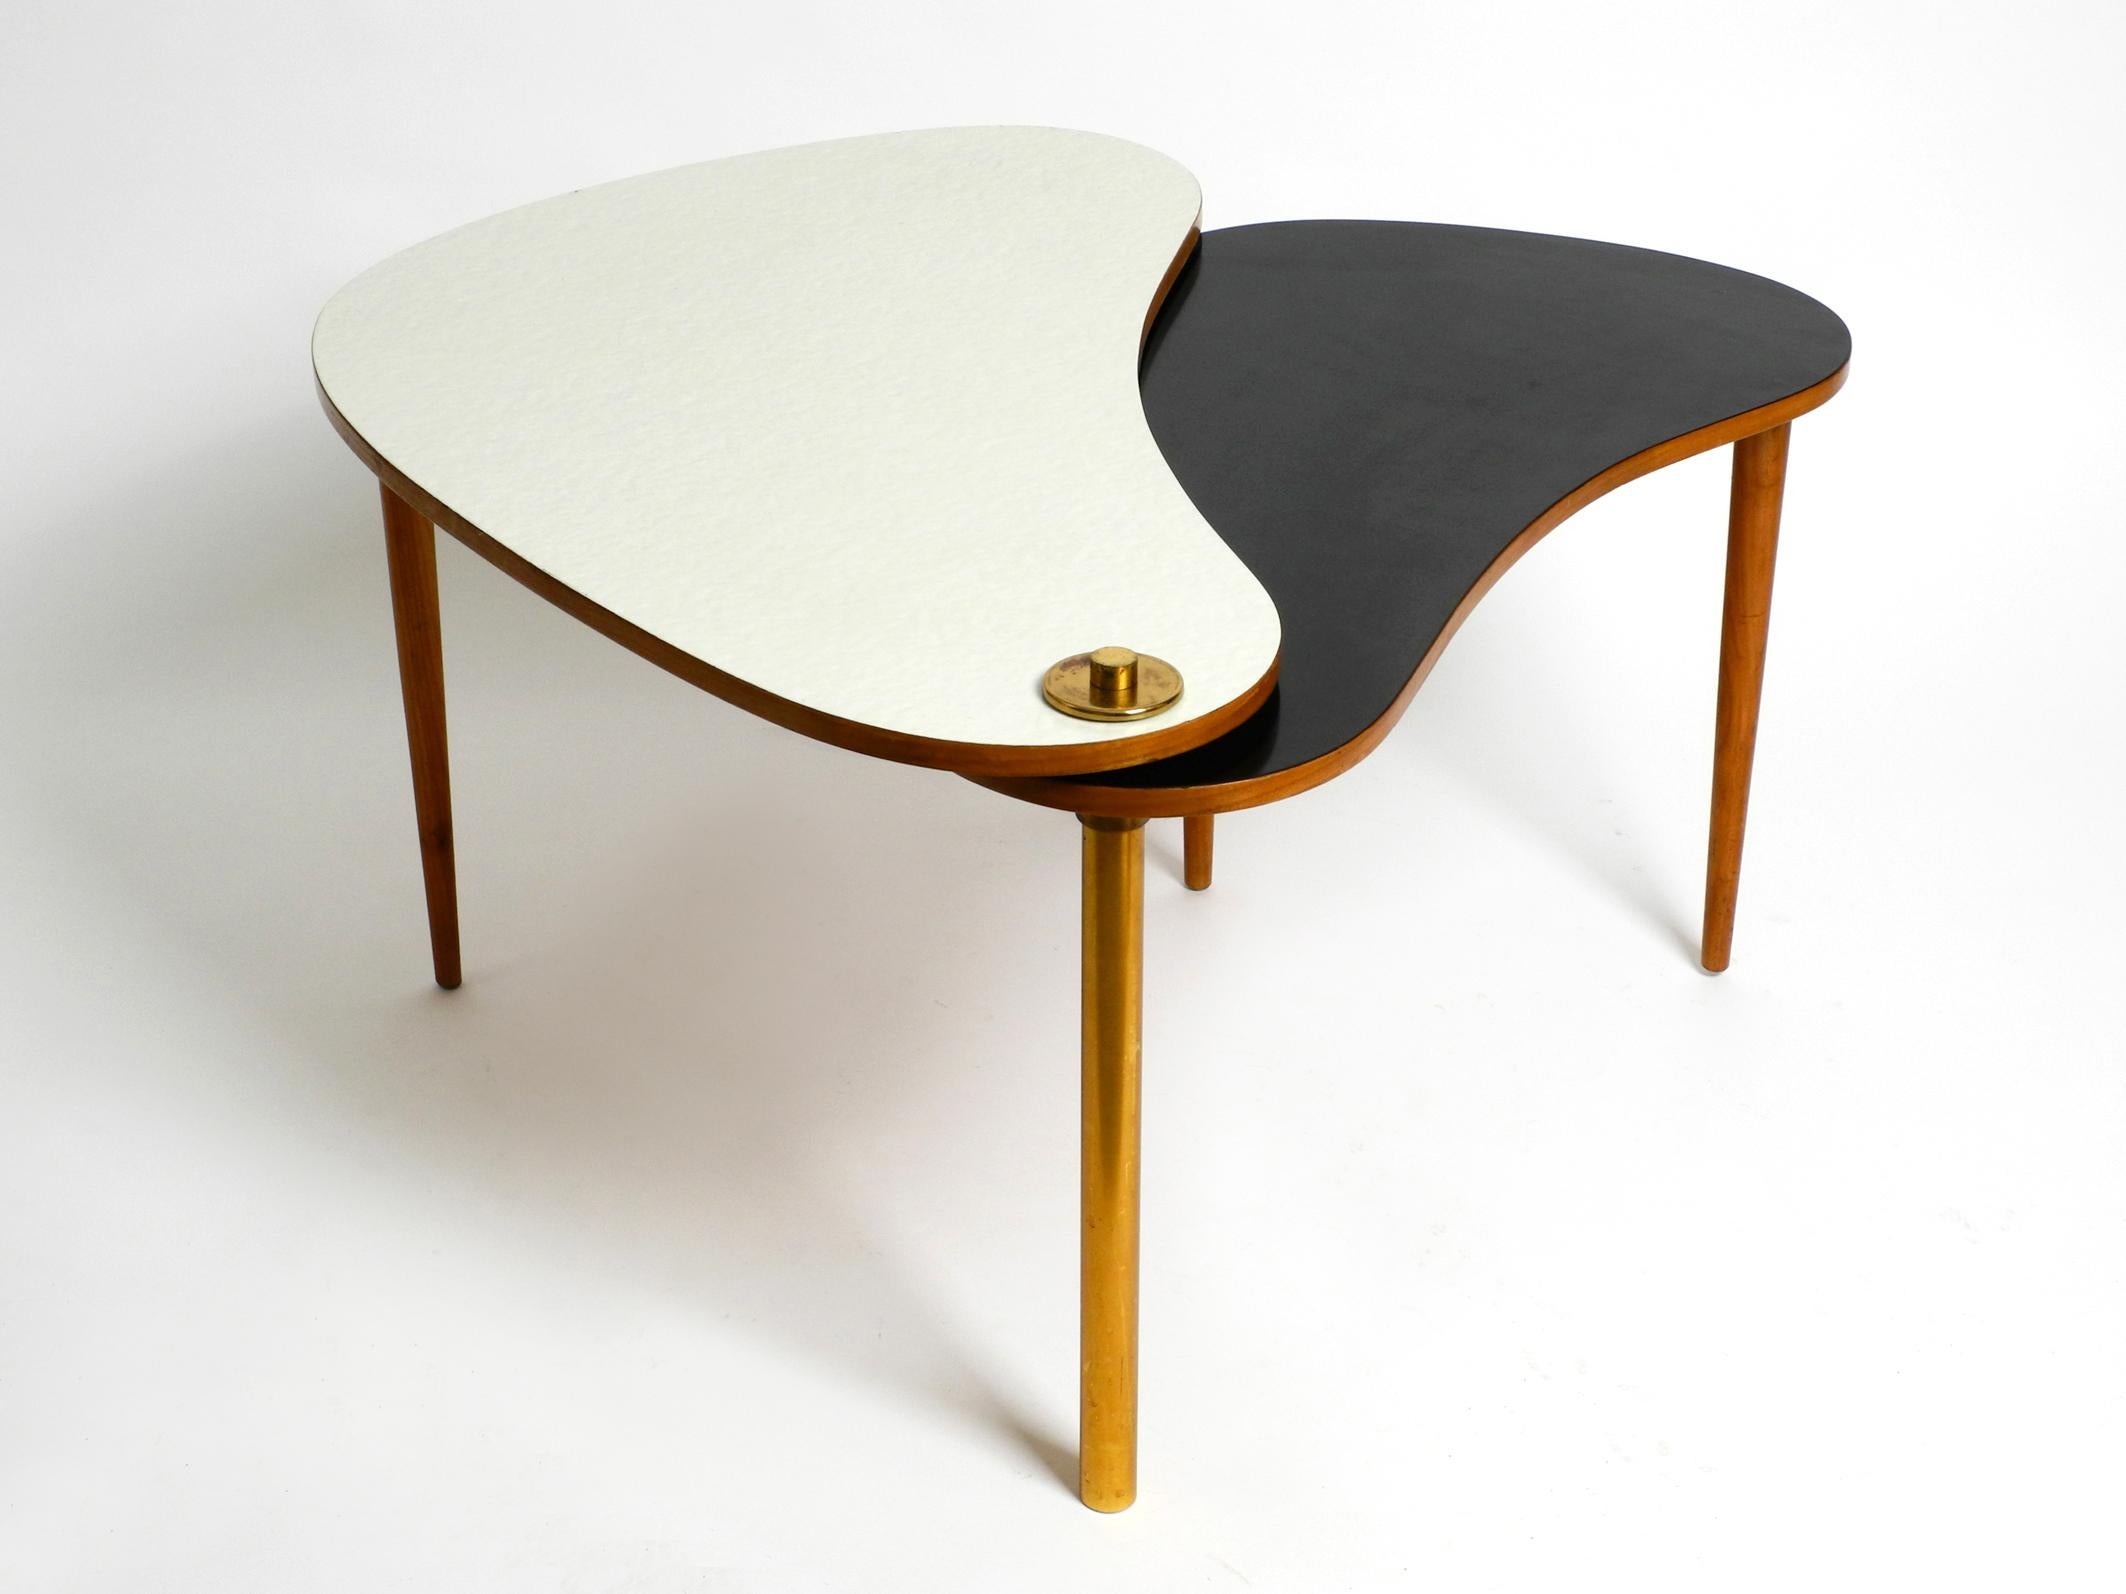 German Xl Three-Legged Midcentury Kidney Side Table Consisting of Two Twistable Tables